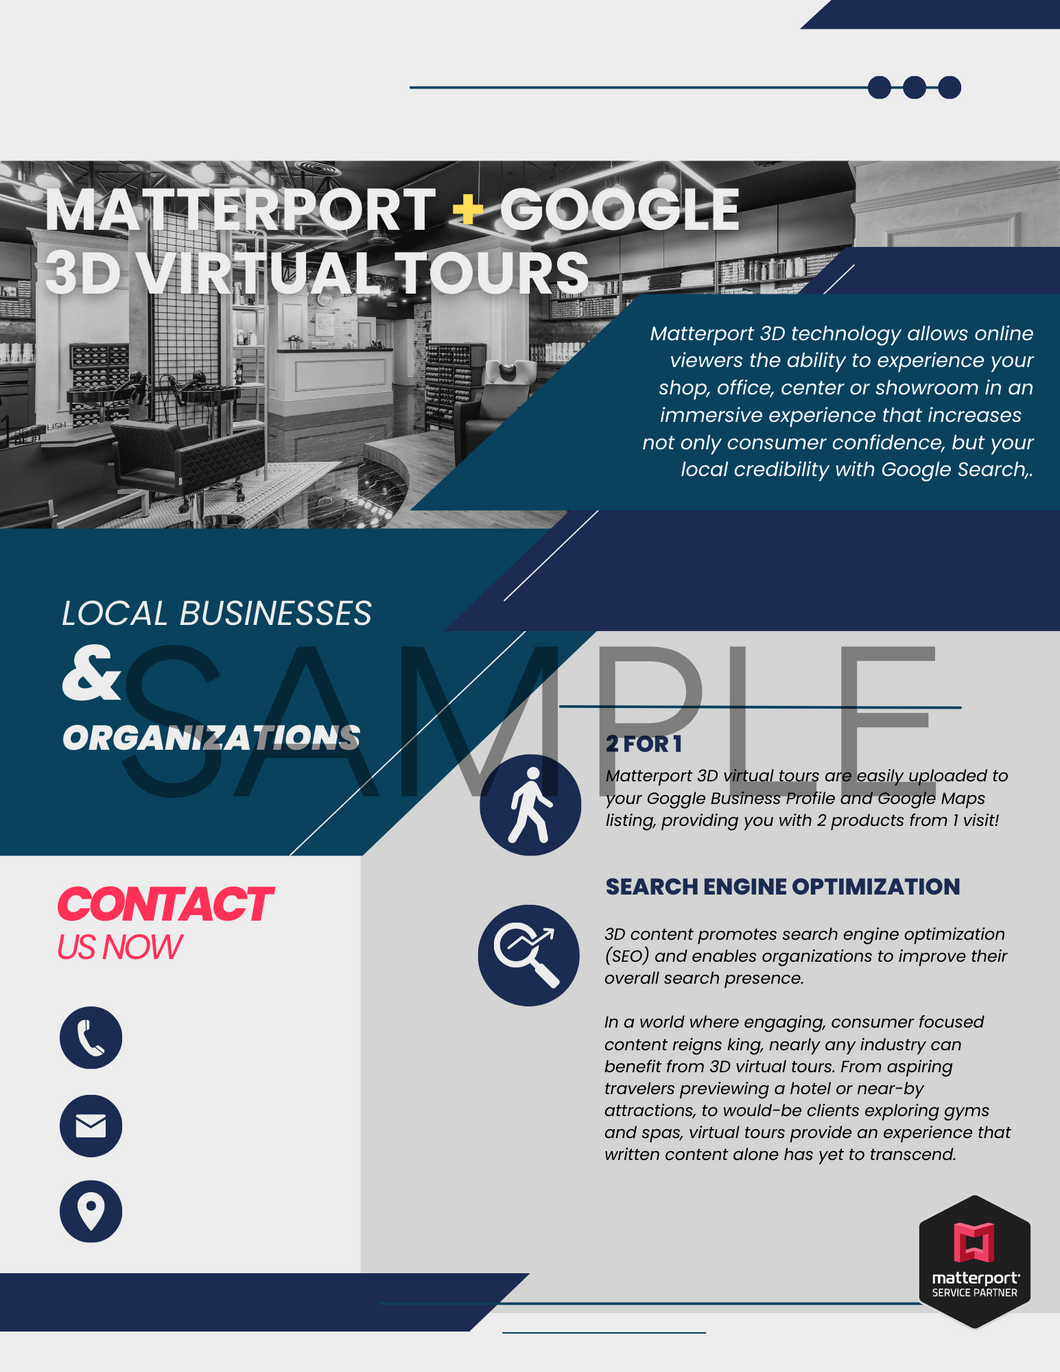 Matterport Marketing for Local Business